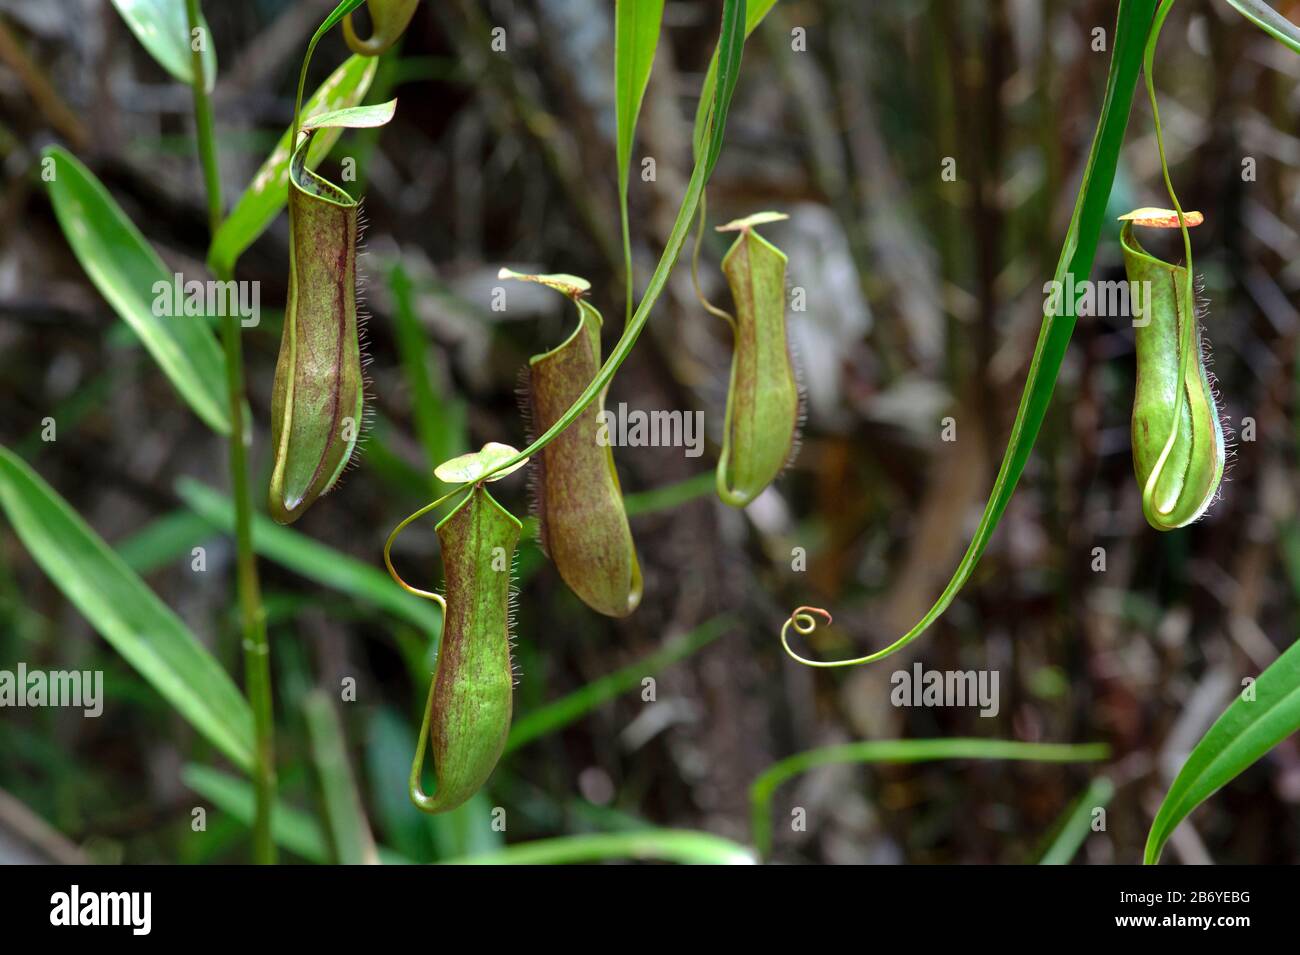 Pitcher planst (Nepenthes gracilis) in situ, Pitcher plant family (Nepenthaceae), Kinabatangan river flood plain, Sabah, Borneo, Malaysia Stock Photo